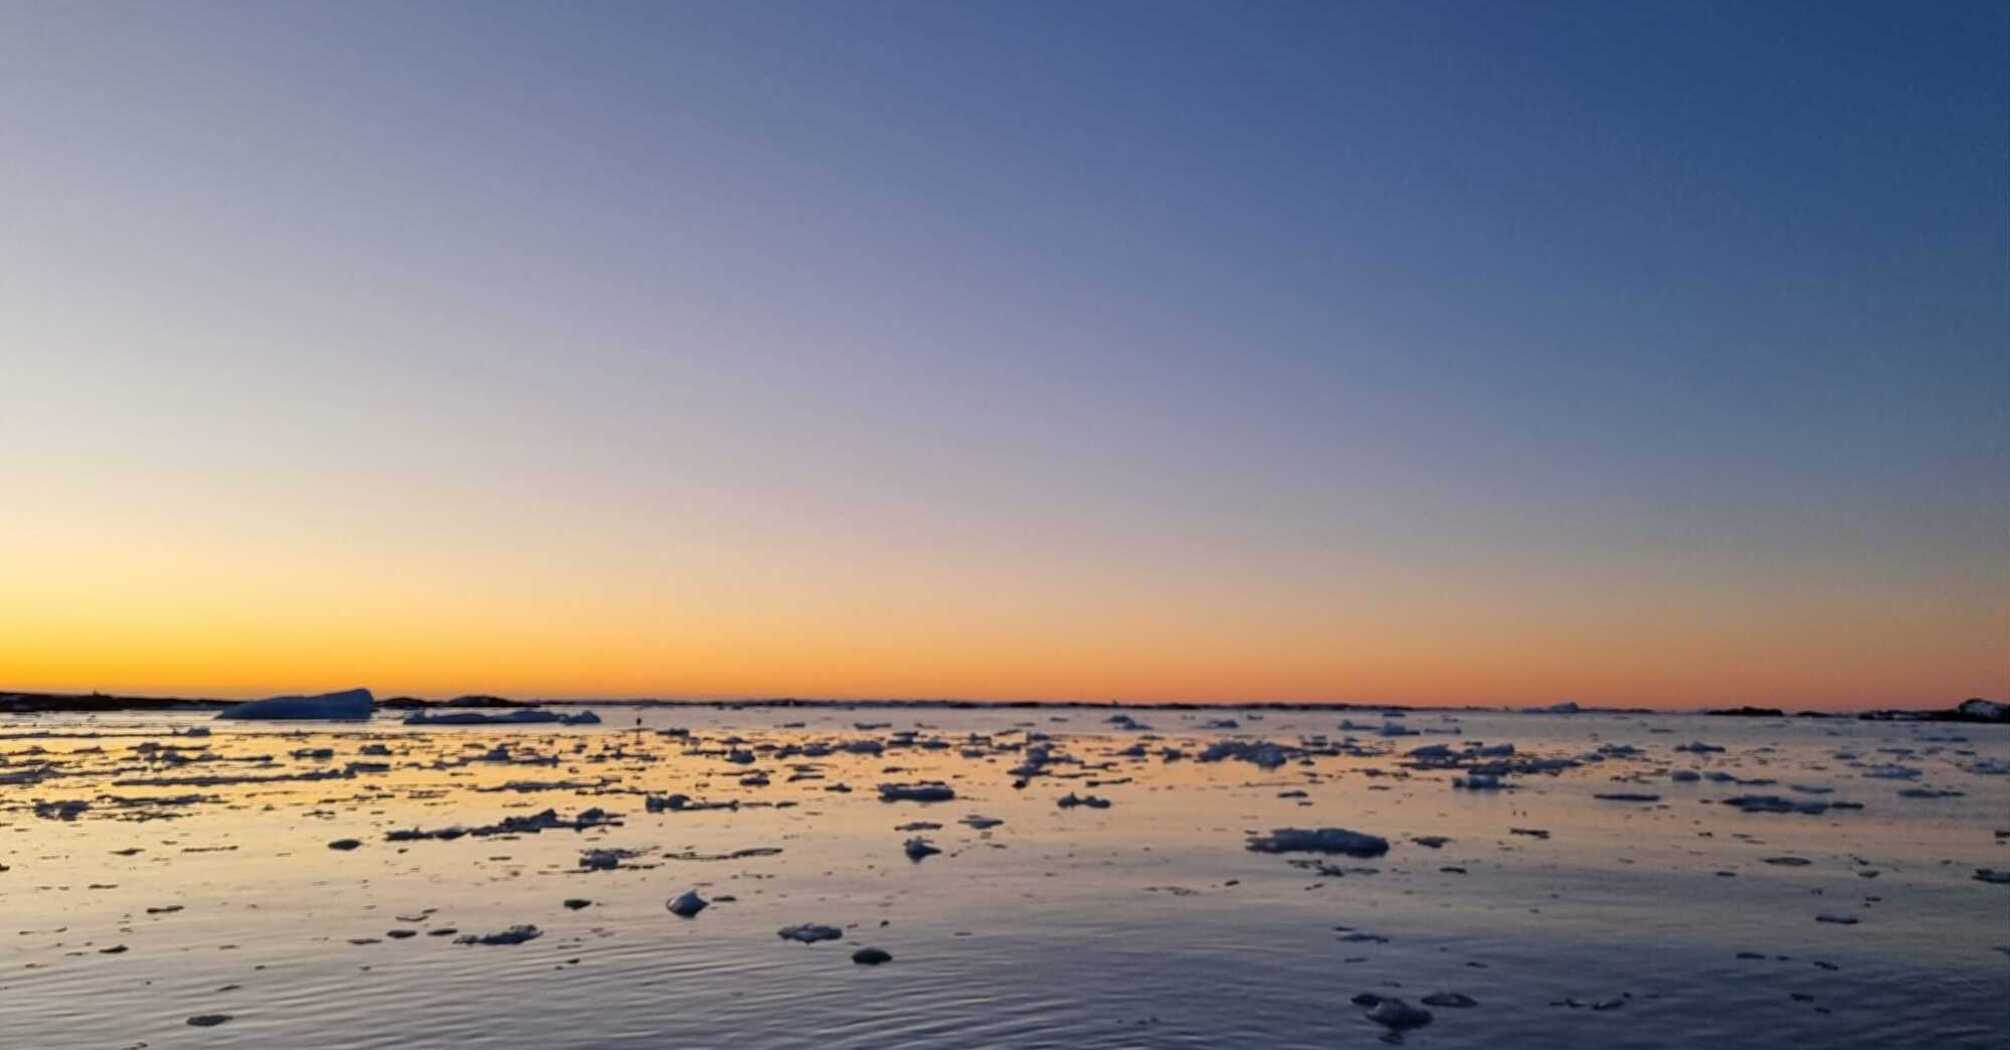 Photos of the sunset in Antarctica